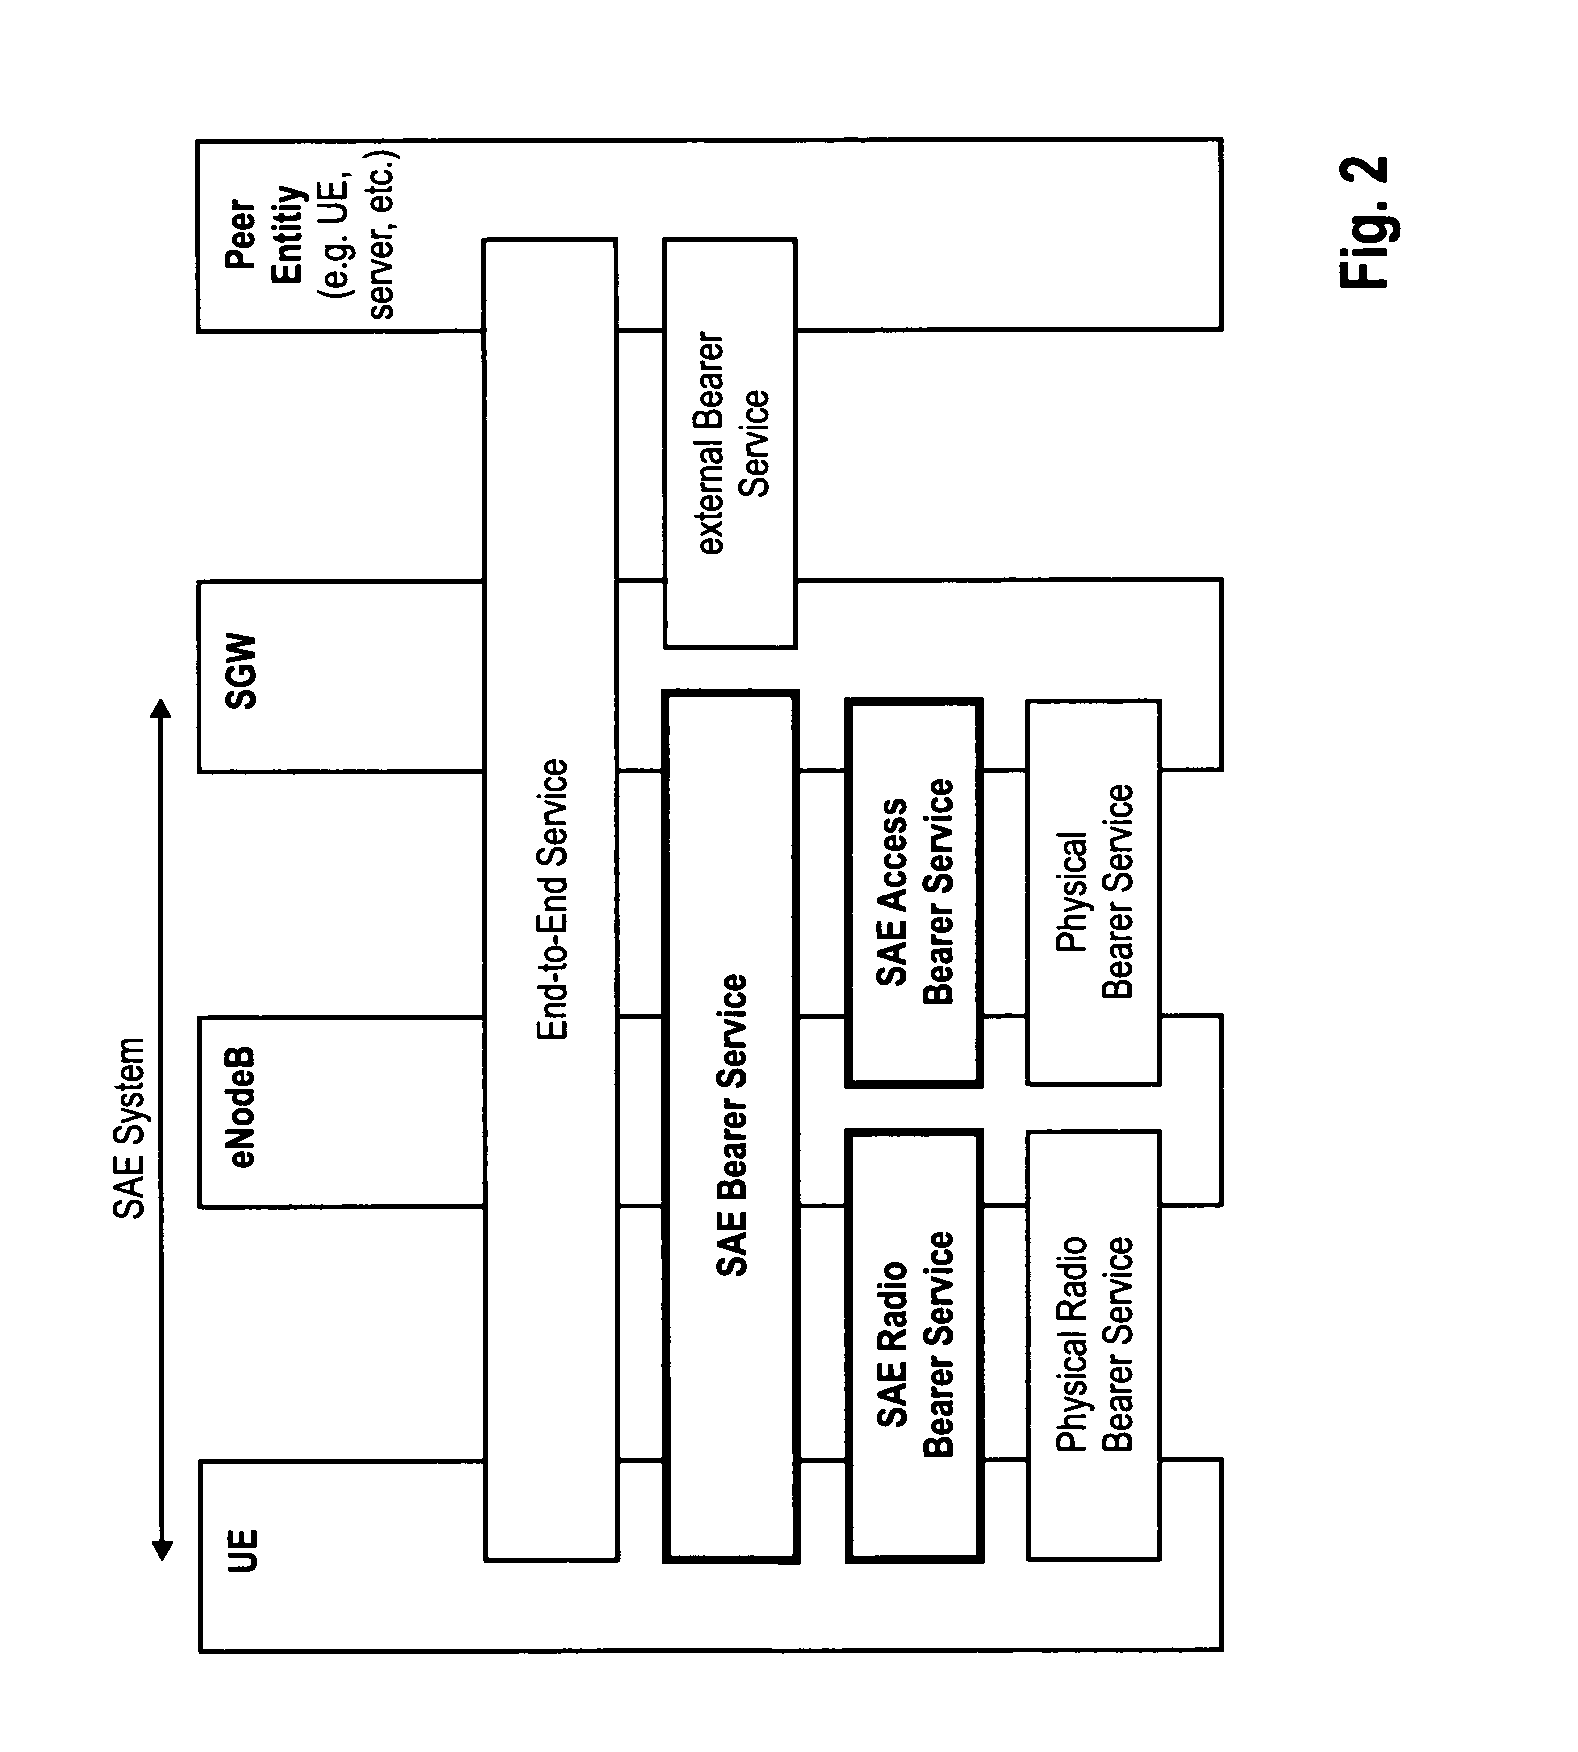 Buffer status reporting in a mobile communication system